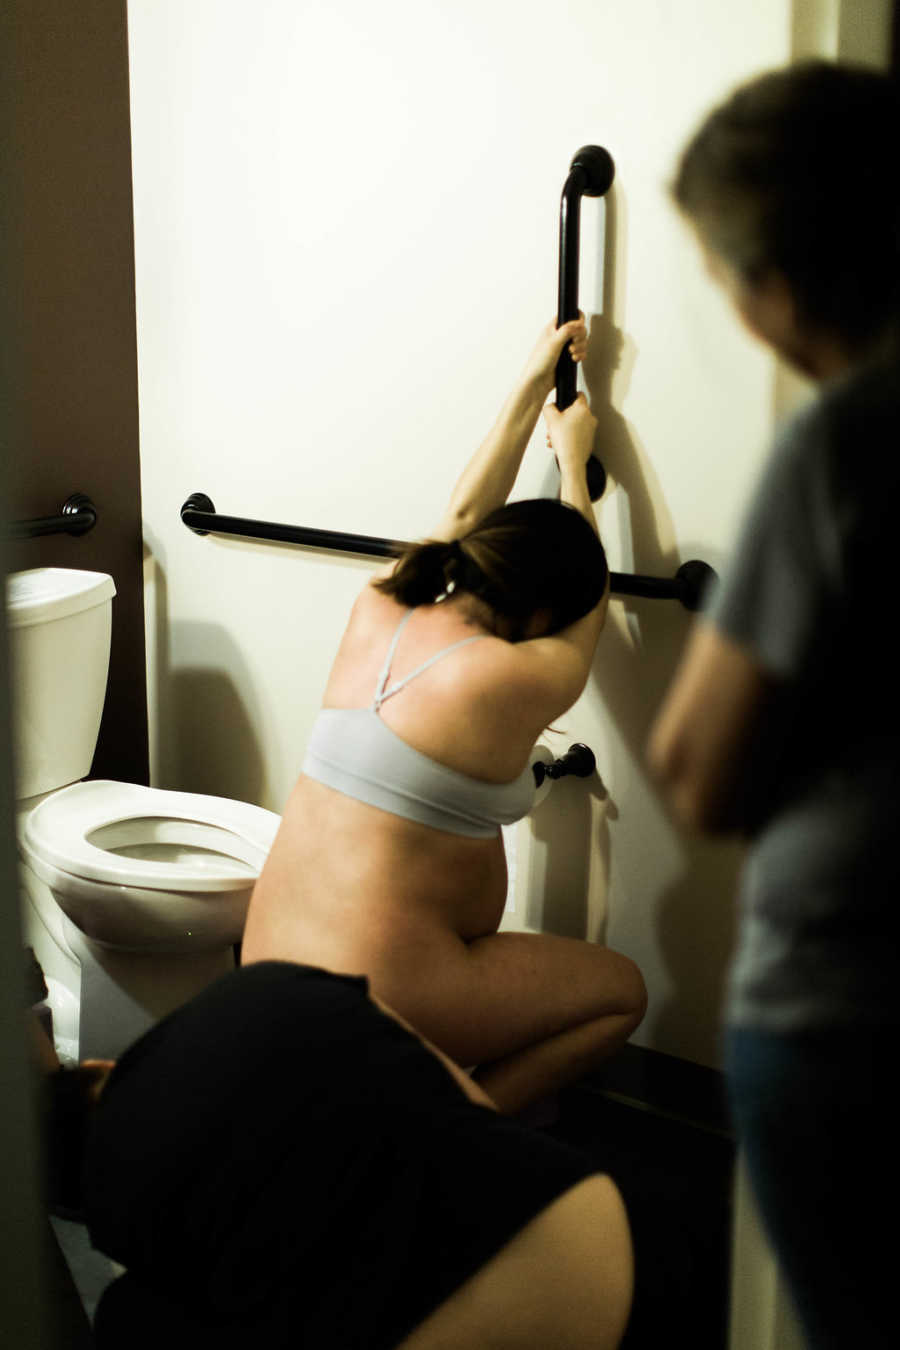 Pregnant woman crouches down holding on to a handle next to toilet